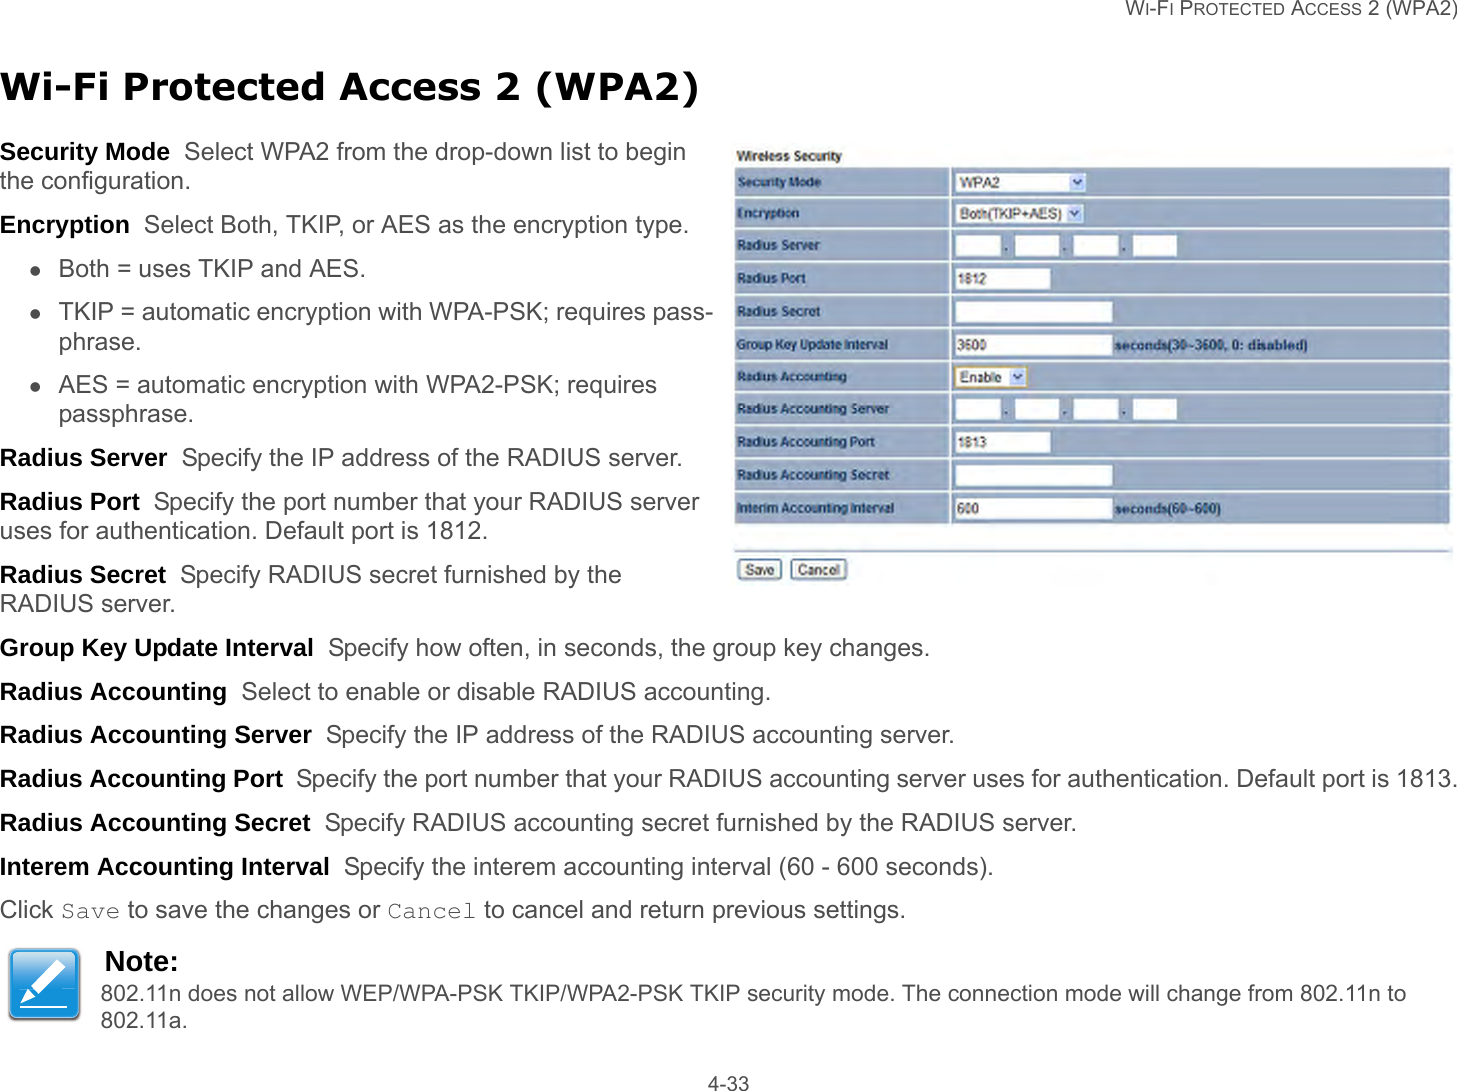   WI-FI PROTECTED ACCESS 2 (WPA2) 4-33Wi-Fi Protected Access 2 (WPA2)Security Mode  Select WPA2 from the drop-down list to begin the configuration.Encryption  Select Both, TKIP, or AES as the encryption type.Both = uses TKIP and AES.TKIP = automatic encryption with WPA-PSK; requires pass-phrase.AES = automatic encryption with WPA2-PSK; requires passphrase.Radius Server  Specify the IP address of the RADIUS server.Radius Port  Specify the port number that your RADIUS server uses for authentication. Default port is 1812.Radius Secret  Specify RADIUS secret furnished by the RADIUS server.Group Key Update Interval  Specify how often, in seconds, the group key changes.Radius Accounting  Select to enable or disable RADIUS accounting.Radius Accounting Server  Specify the IP address of the RADIUS accounting server.Radius Accounting Port  Specify the port number that your RADIUS accounting server uses for authentication. Default port is 1813.Radius Accounting Secret  Specify RADIUS accounting secret furnished by the RADIUS server.Interem Accounting Interval  Specify the interem accounting interval (60 - 600 seconds).Click Save to save the changes or Cancel to cancel and return previous settings.Note:802.11n does not allow WEP/WPA-PSK TKIP/WPA2-PSK TKIP security mode. The connection mode will change from 802.11n to 802.11a.